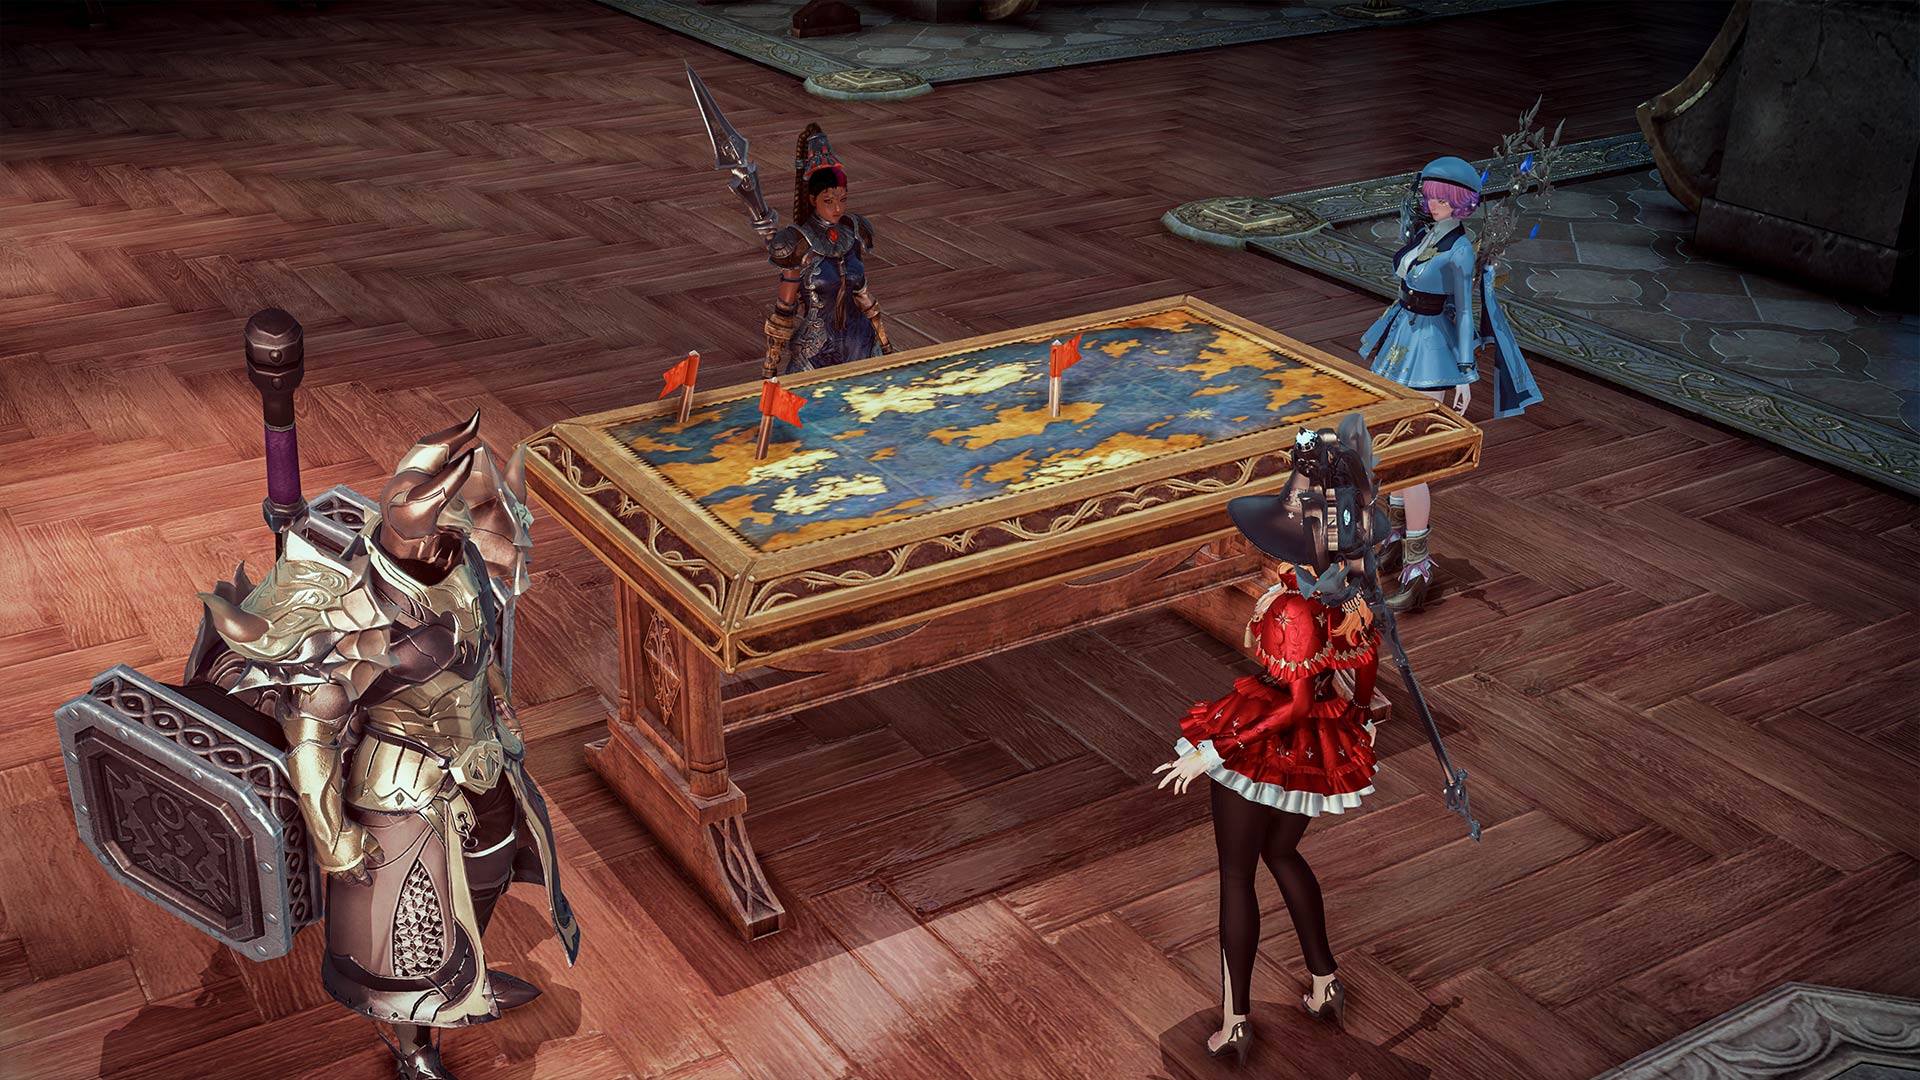 The guild activities table in Lost Ark.